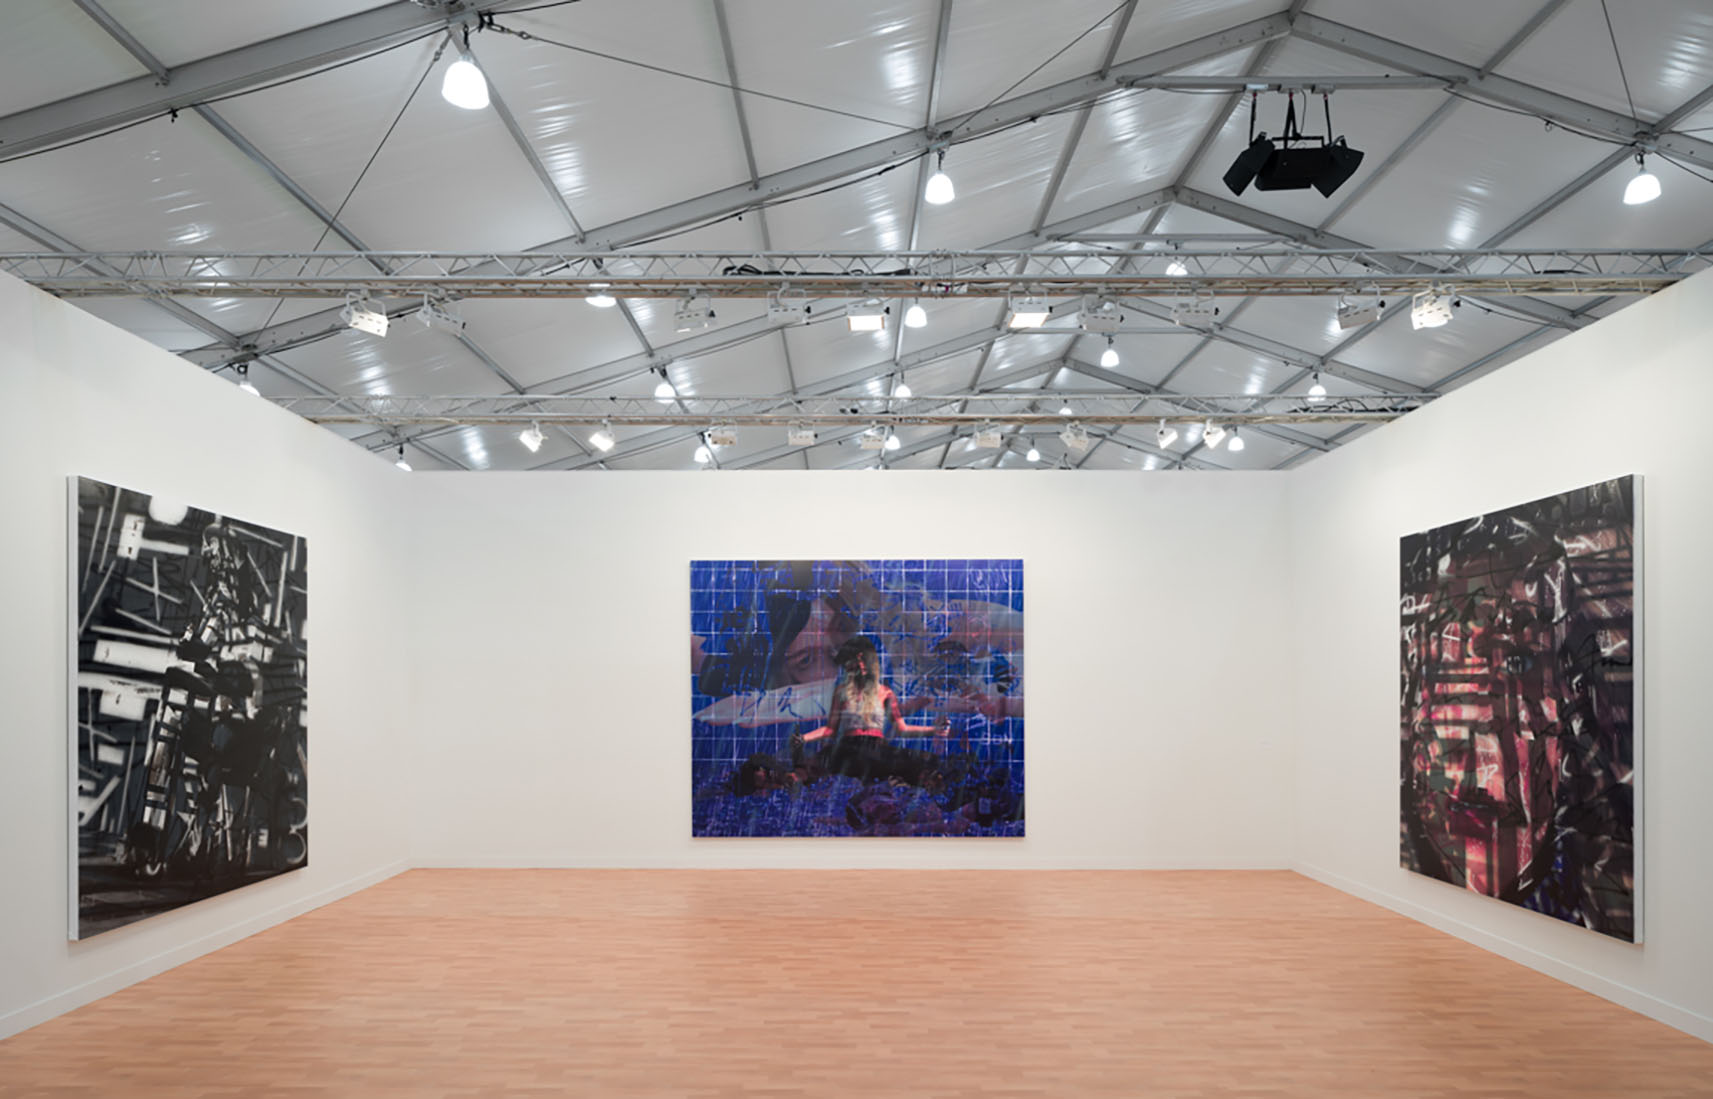 Installation view, Avery Singer at Hauser & Wirth, Frieze Los Angeles. Courtesy Hauser & Wirth. Photo by Fredrik Nilsen